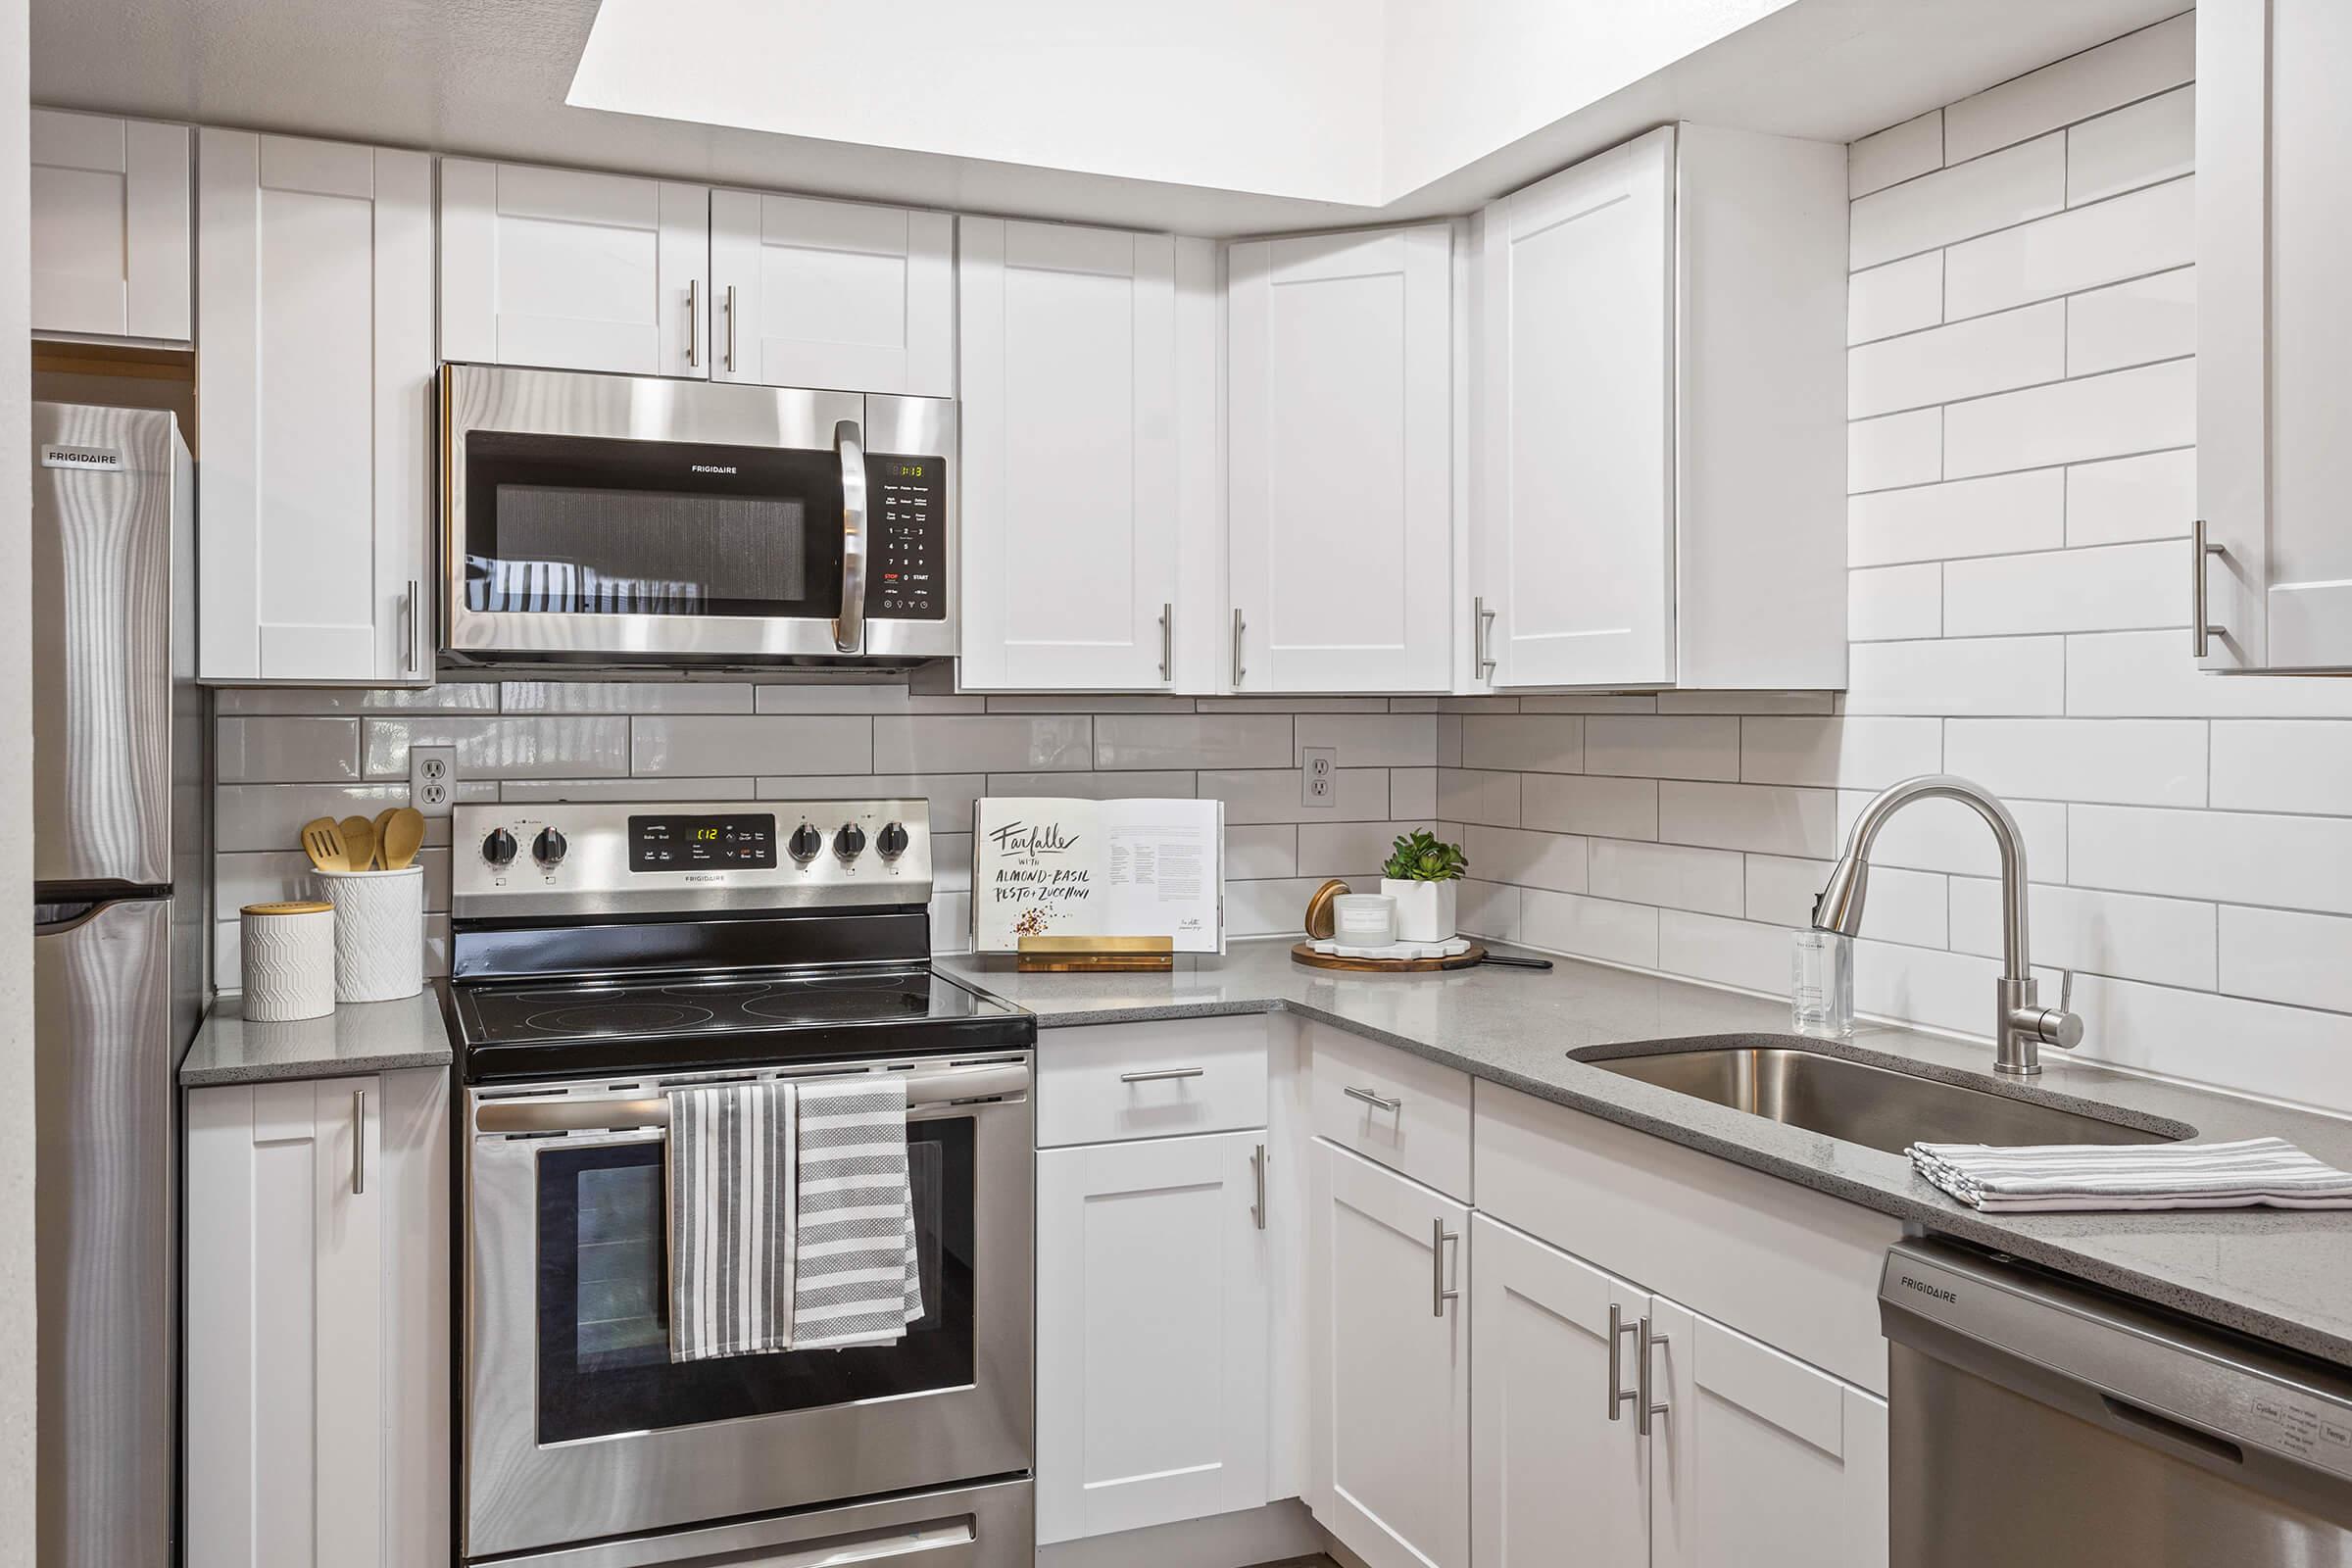 bright open kitchen with white cabinets, stainless steel appliances, and white tile backsplash